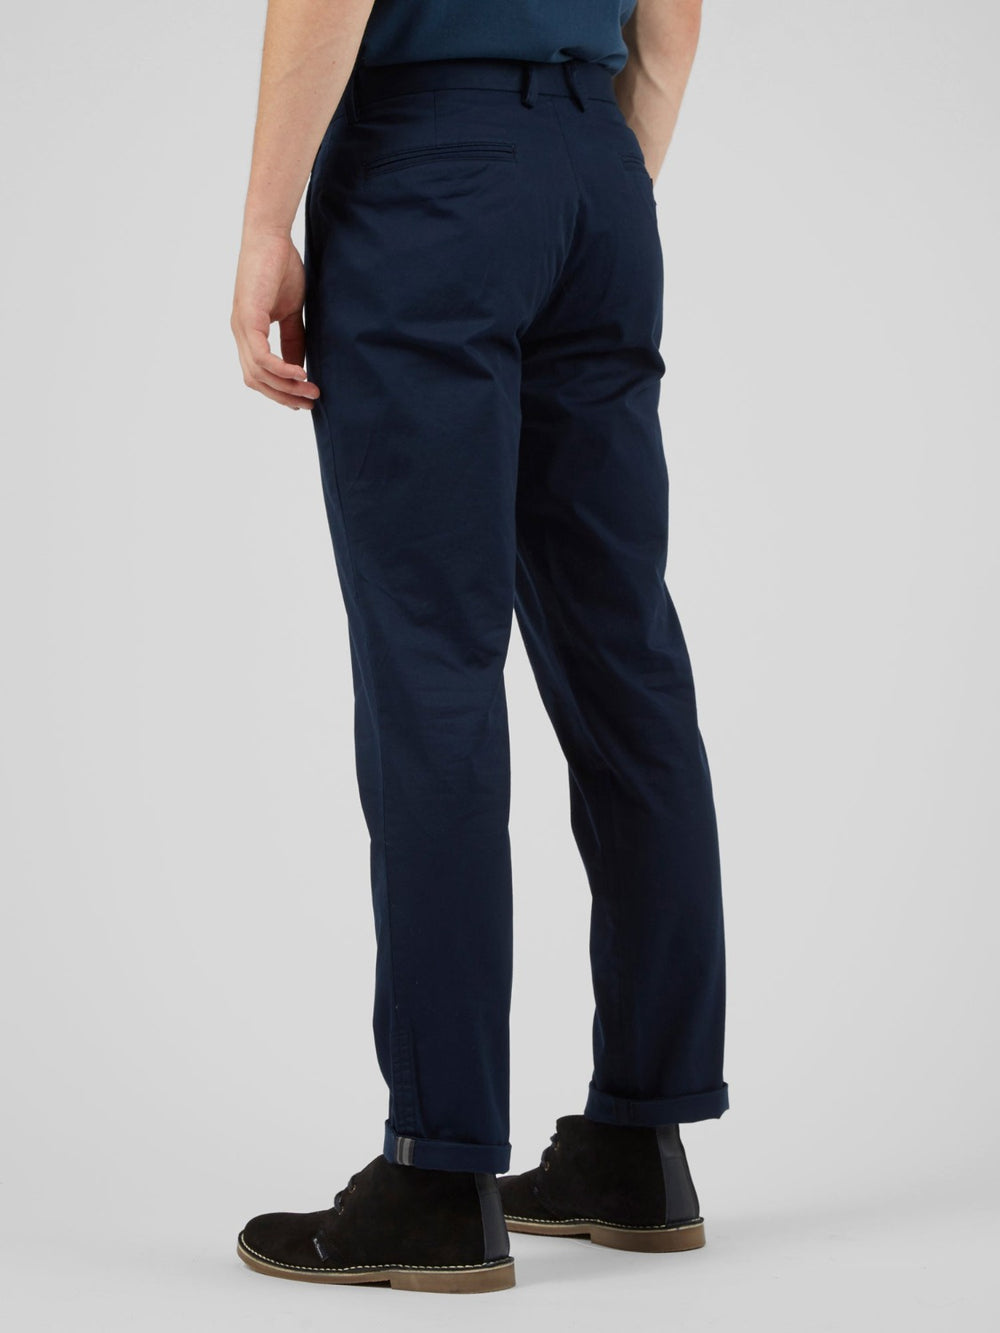 Buy Dark Blue Mens Chino Pants For Men Online in India at Beyoung